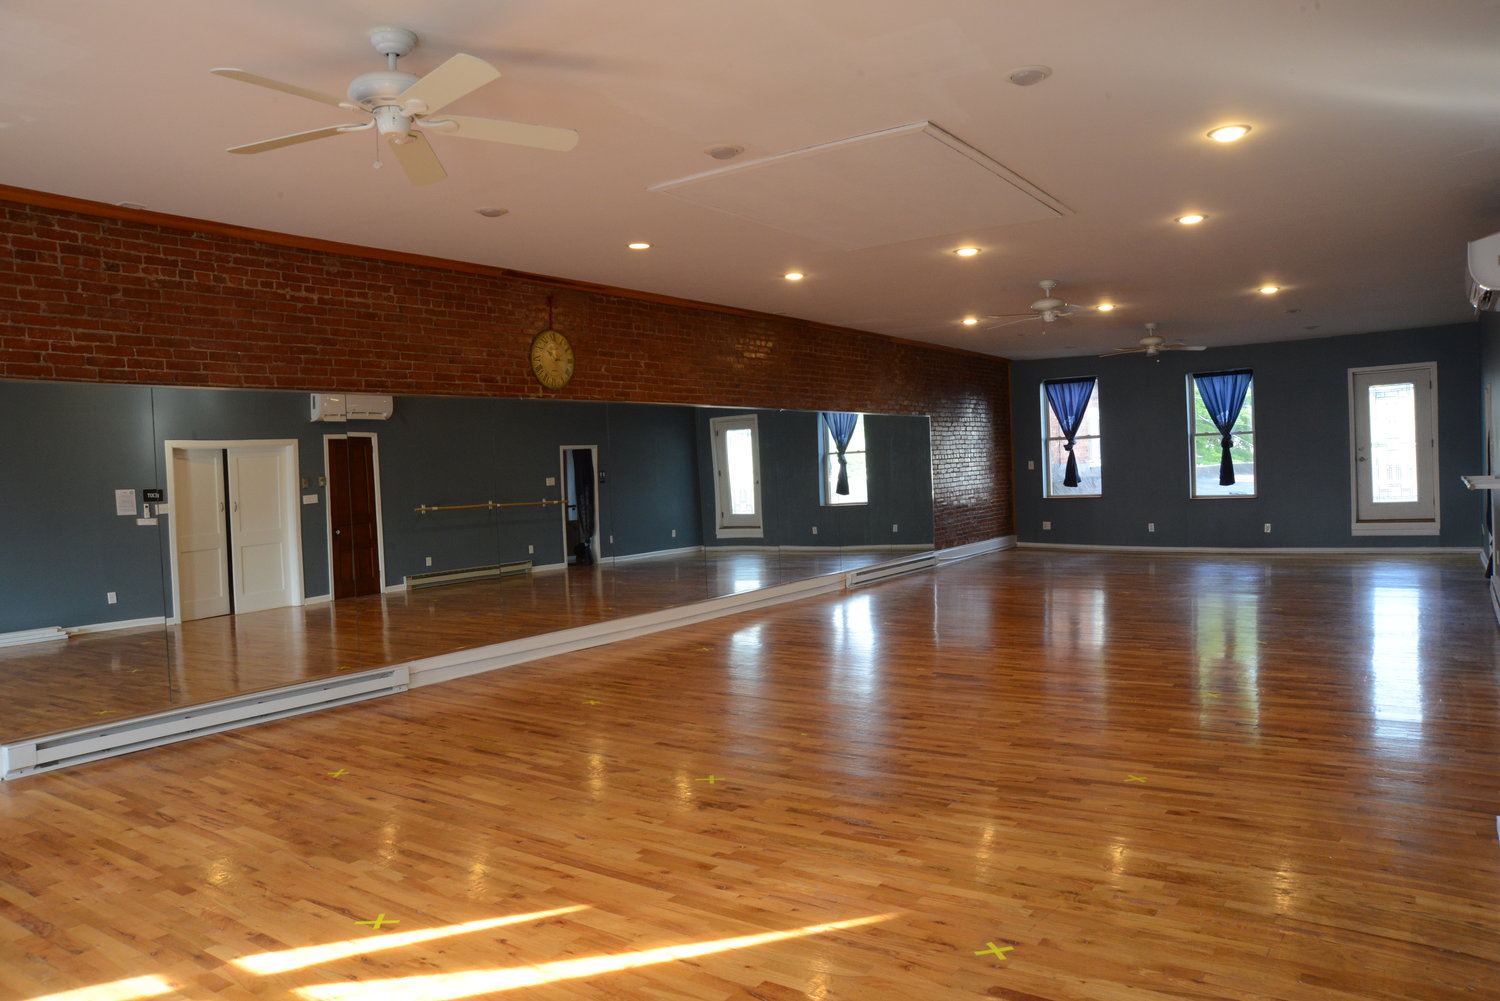 Upstairs, the expansive Eddy Studio allows for dancing, yoga, exercise, meditation and other activities, all while remaining socially distant.